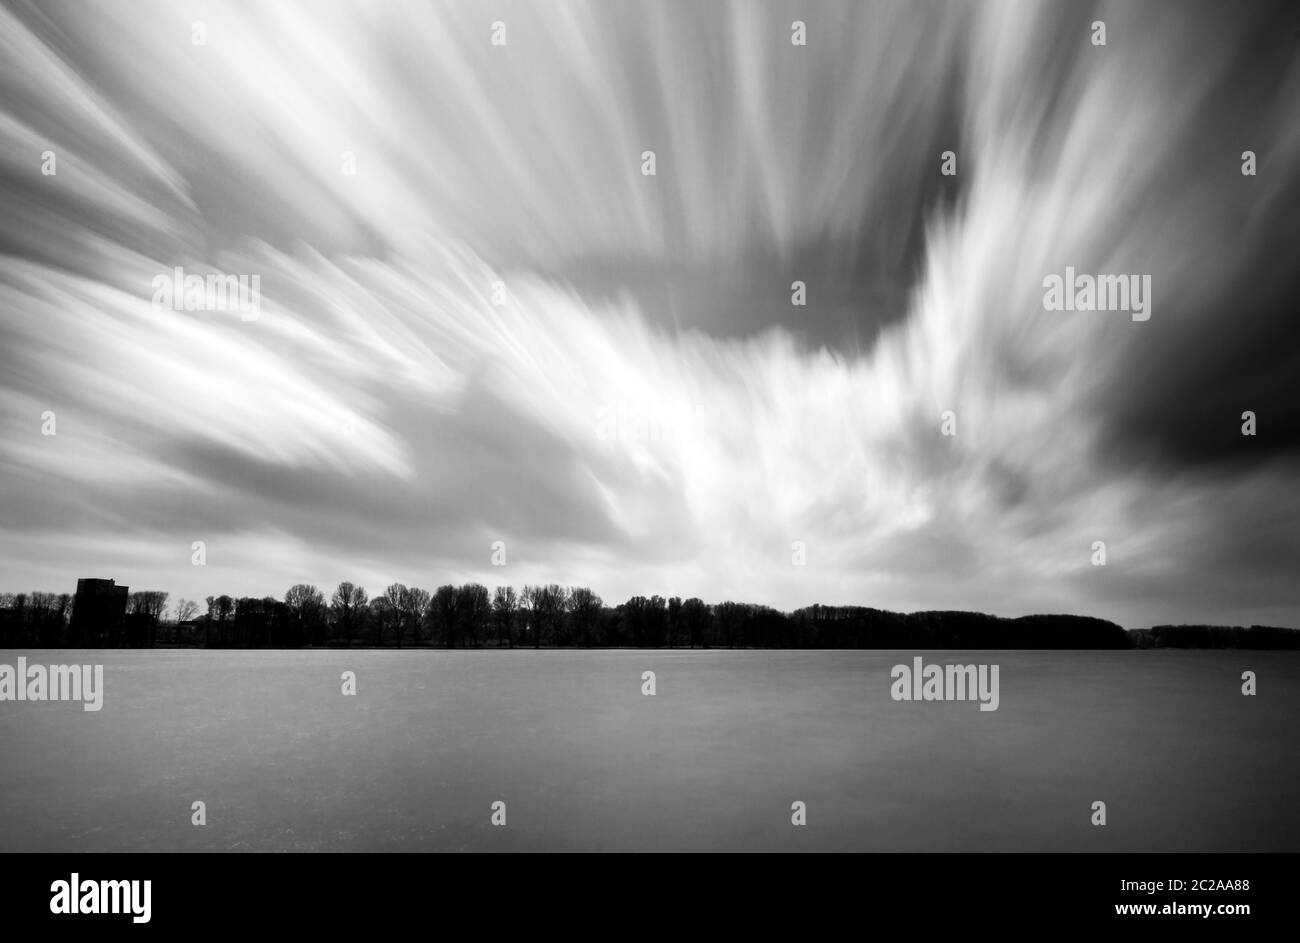 Long exposure black and white landscape at the Sloterplas in Amsterdam, the Netherlands, with clouds passing Stock Photo